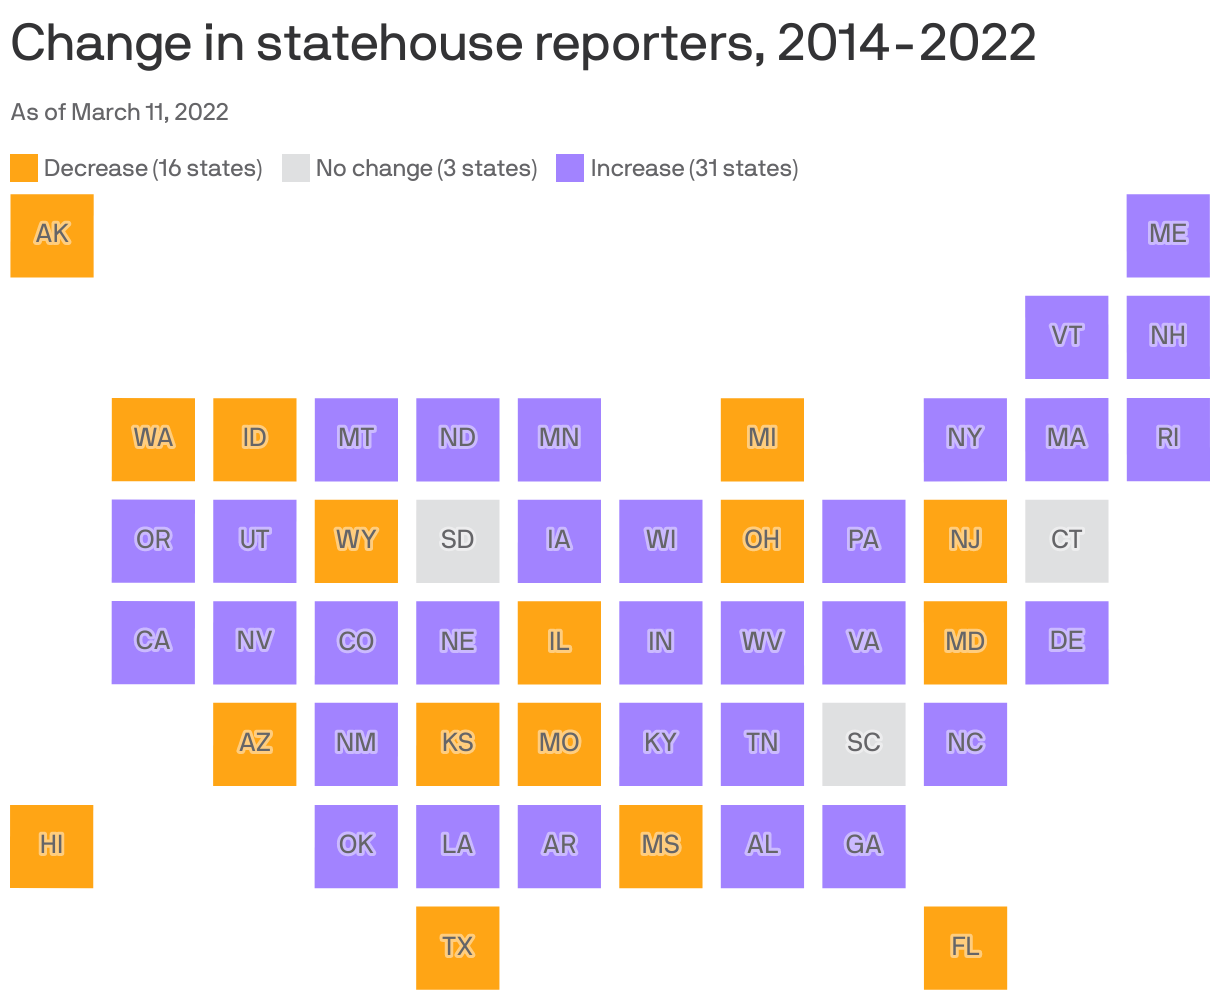 Change in statehouse reporters, 2014-2022